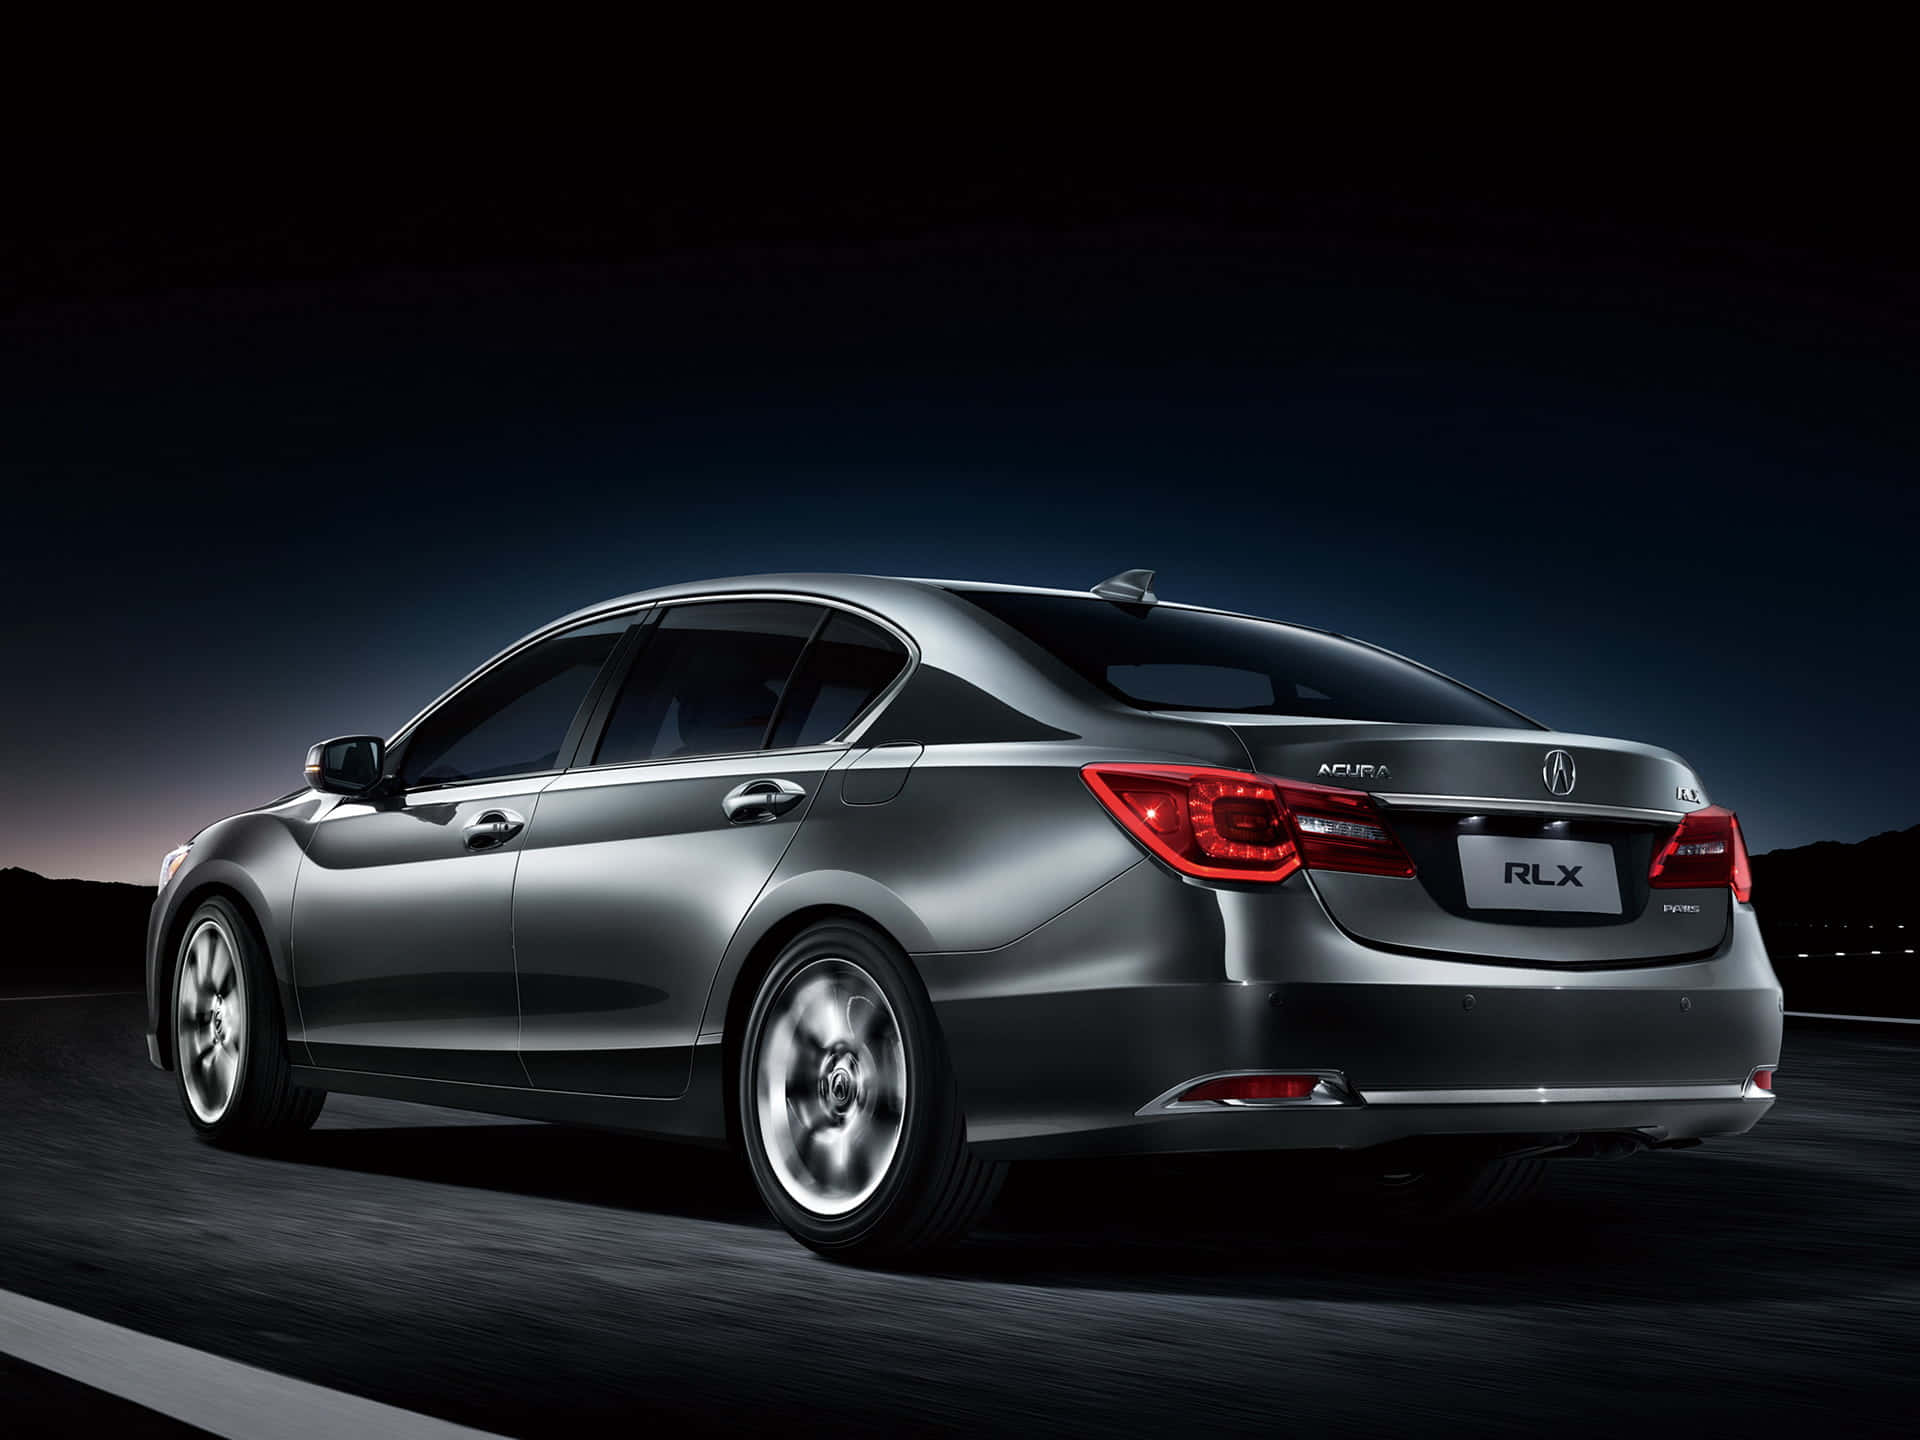 Acura RLX: A Sophisticated Sedan in Motion Wallpaper